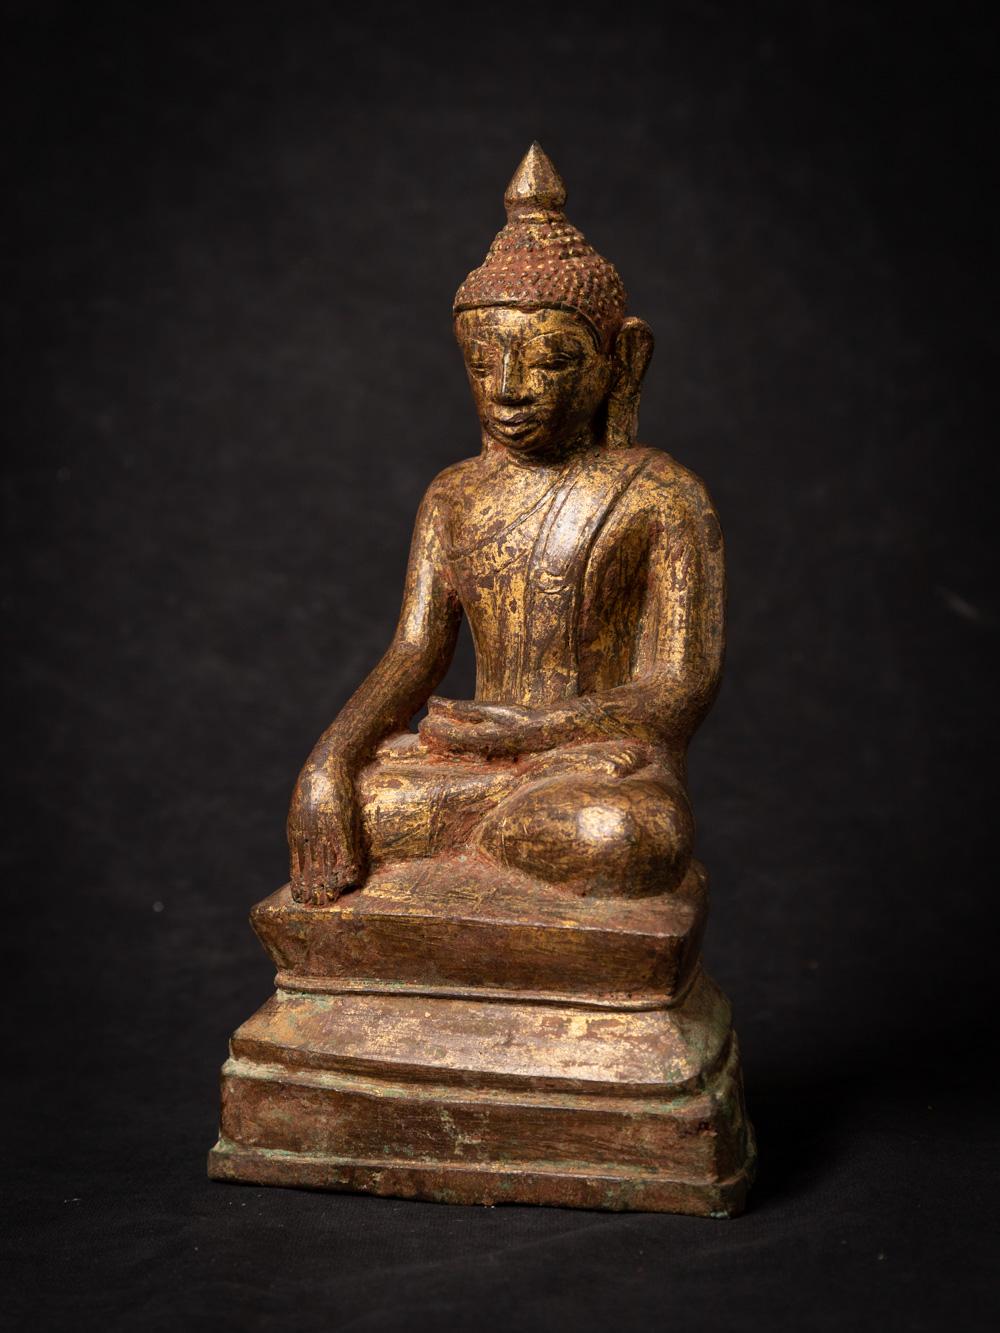 The antique bronze Burmese Buddha statue is a captivating and sacred artifact originating from Burma. Crafted from bronze and gilded with 24-karat gold, this statue stands at 22.1 cm in height and measures 12.9 cm in width and 7.7 cm in depth. The